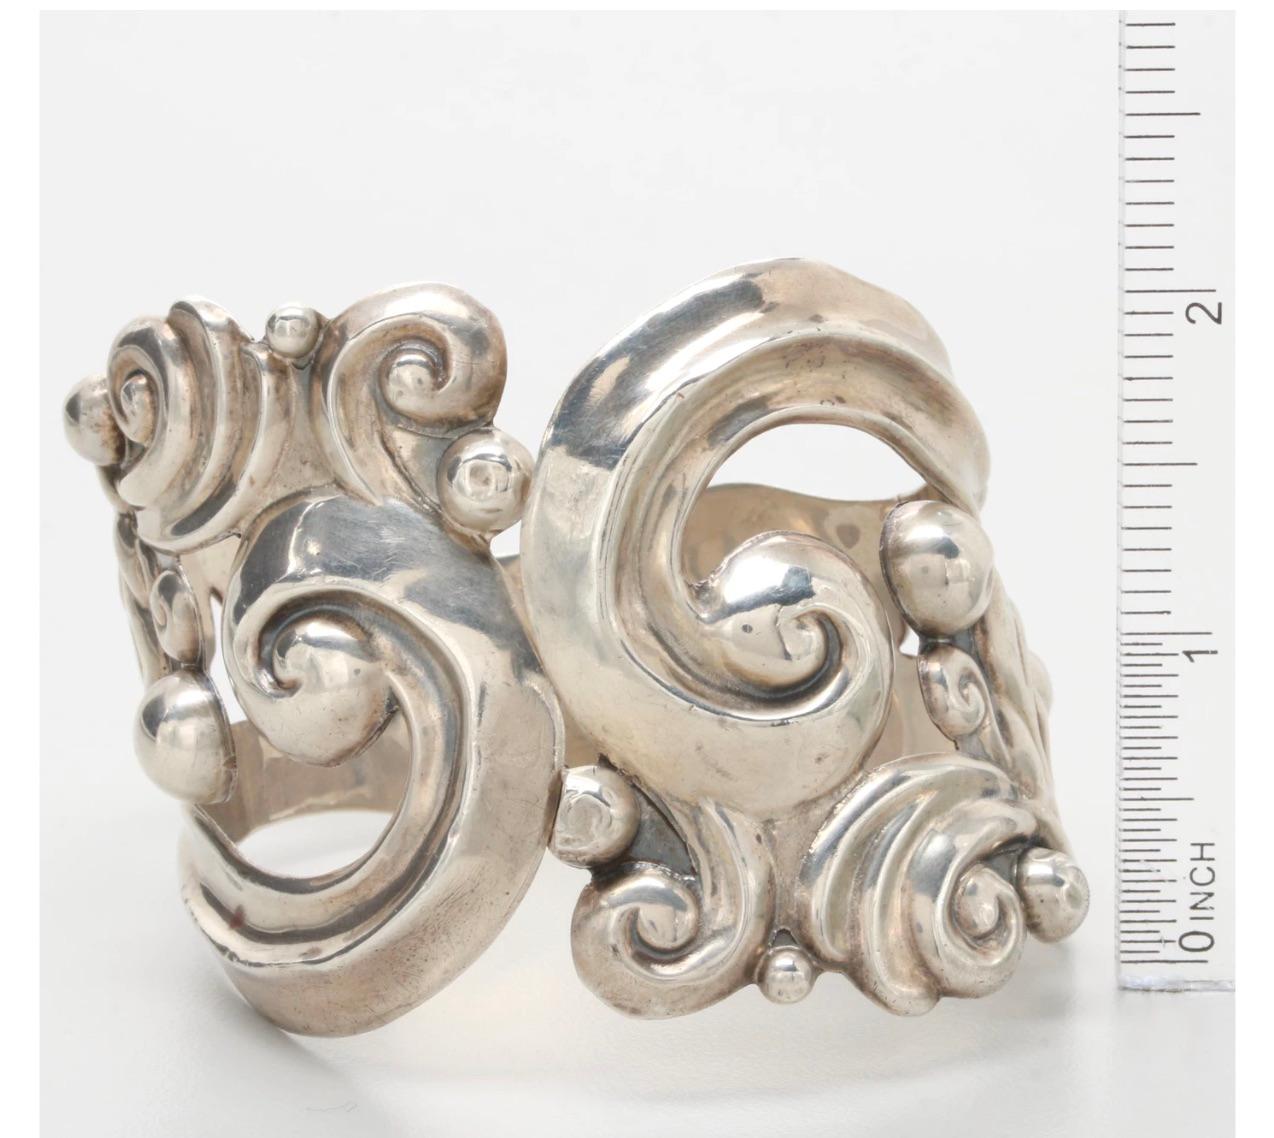 Mexican Extraordinary Rare Mexico Sterling 1940s Clamper Bracelet by A. Pineda For Sale